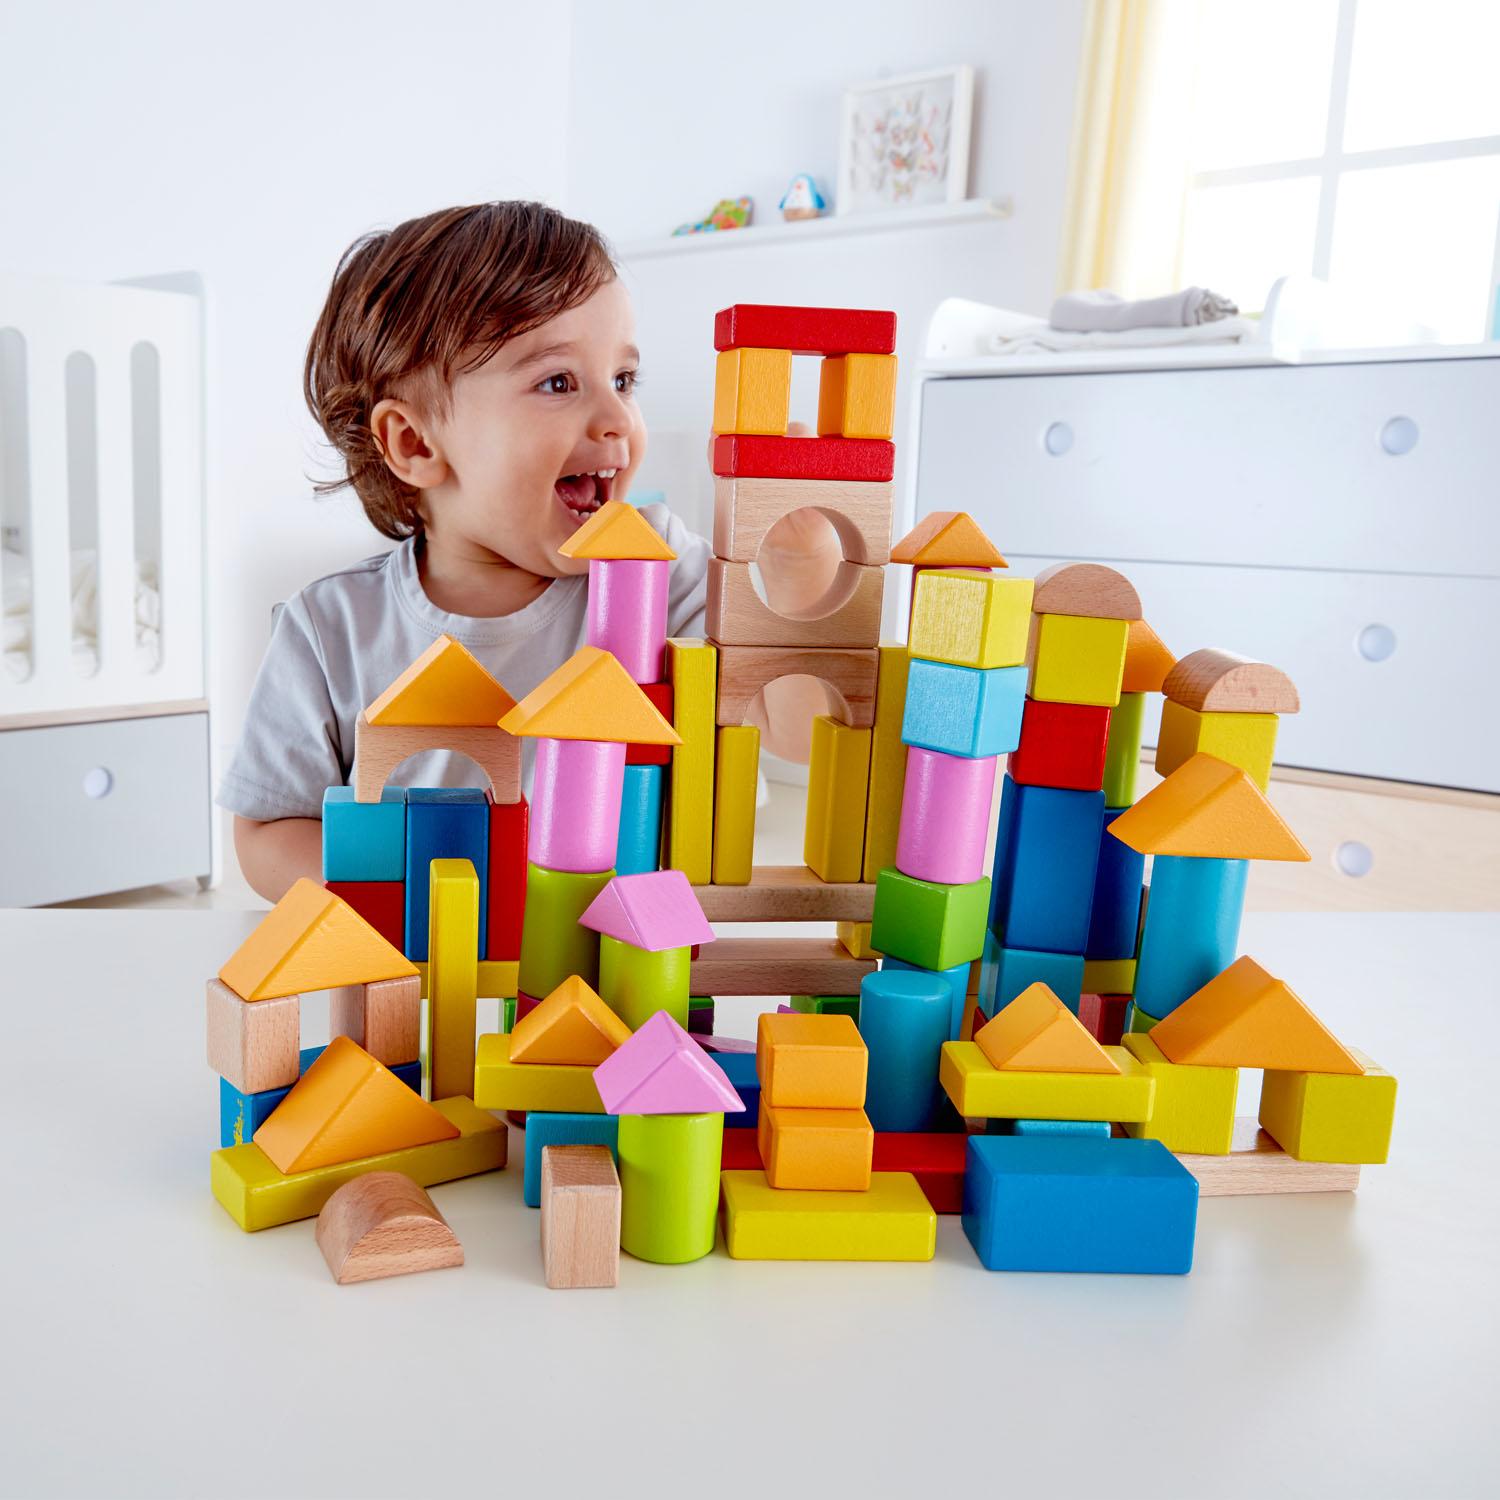 Child with colourful wooden blocks forming an elaborate structure.